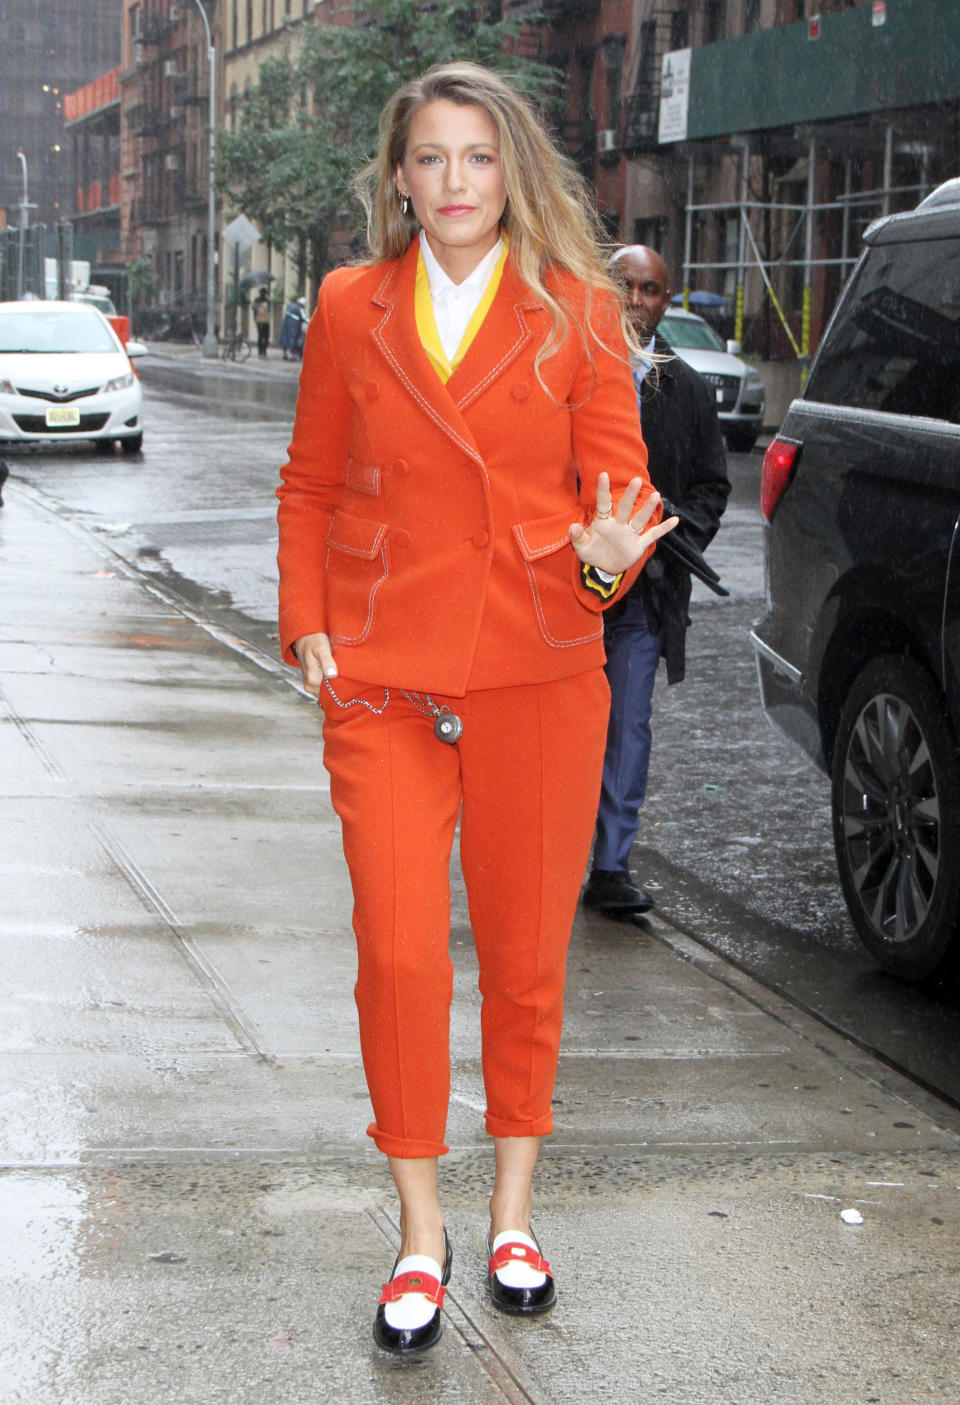 Lively then stepped out in this bright orange suit by Bottega Veneta when she made an appearance at Twitter.&nbsp;